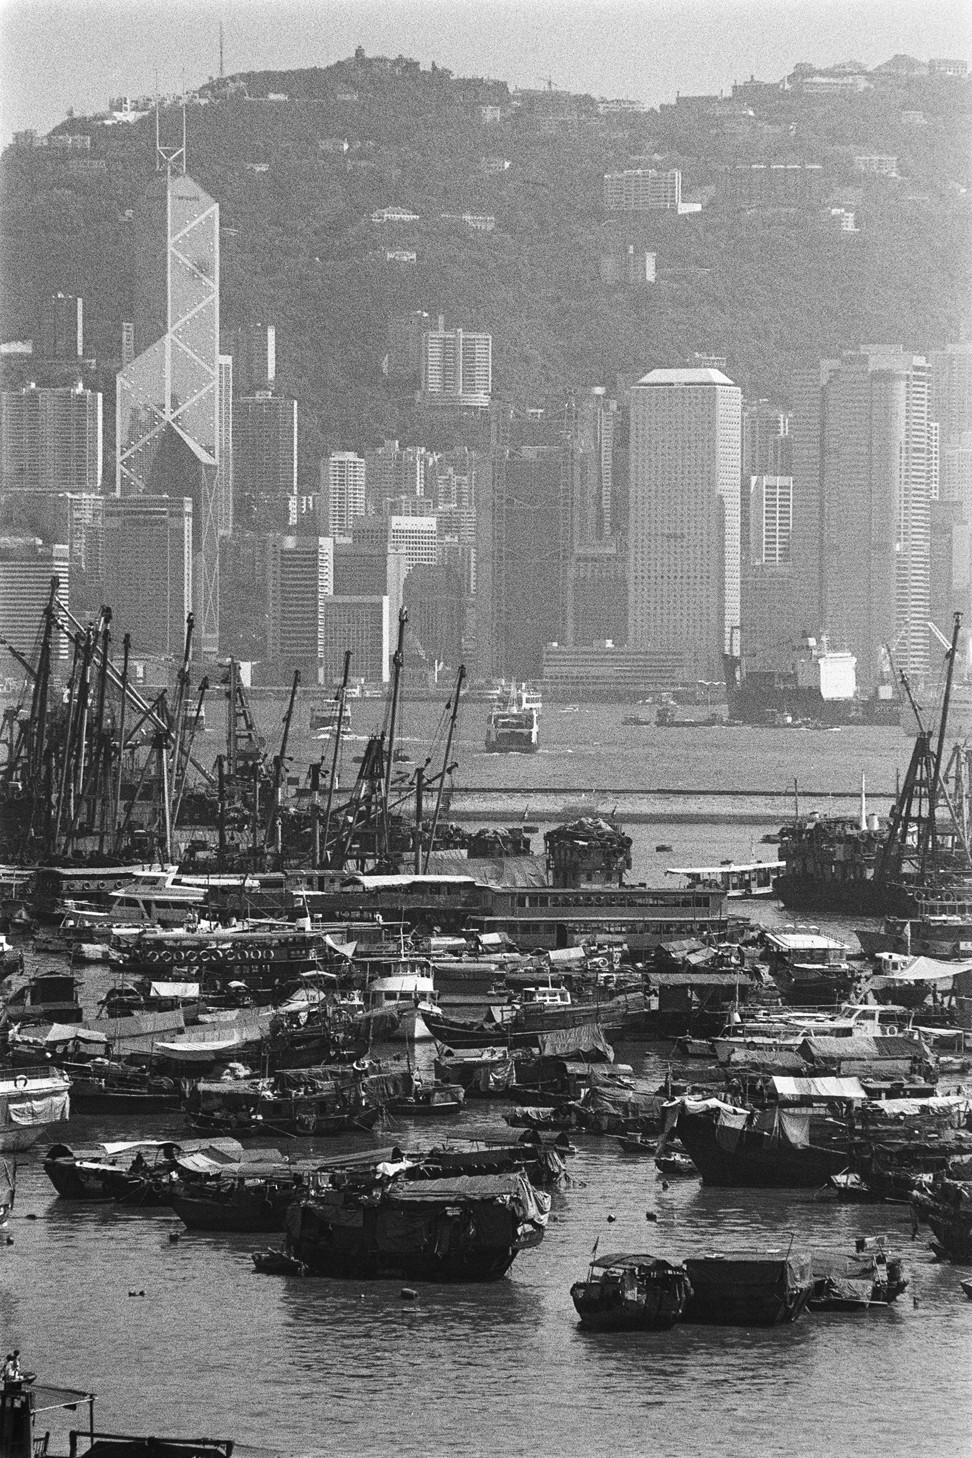 The Yau Ma Tei typhoon shelter with Hong Kong Island in the background.